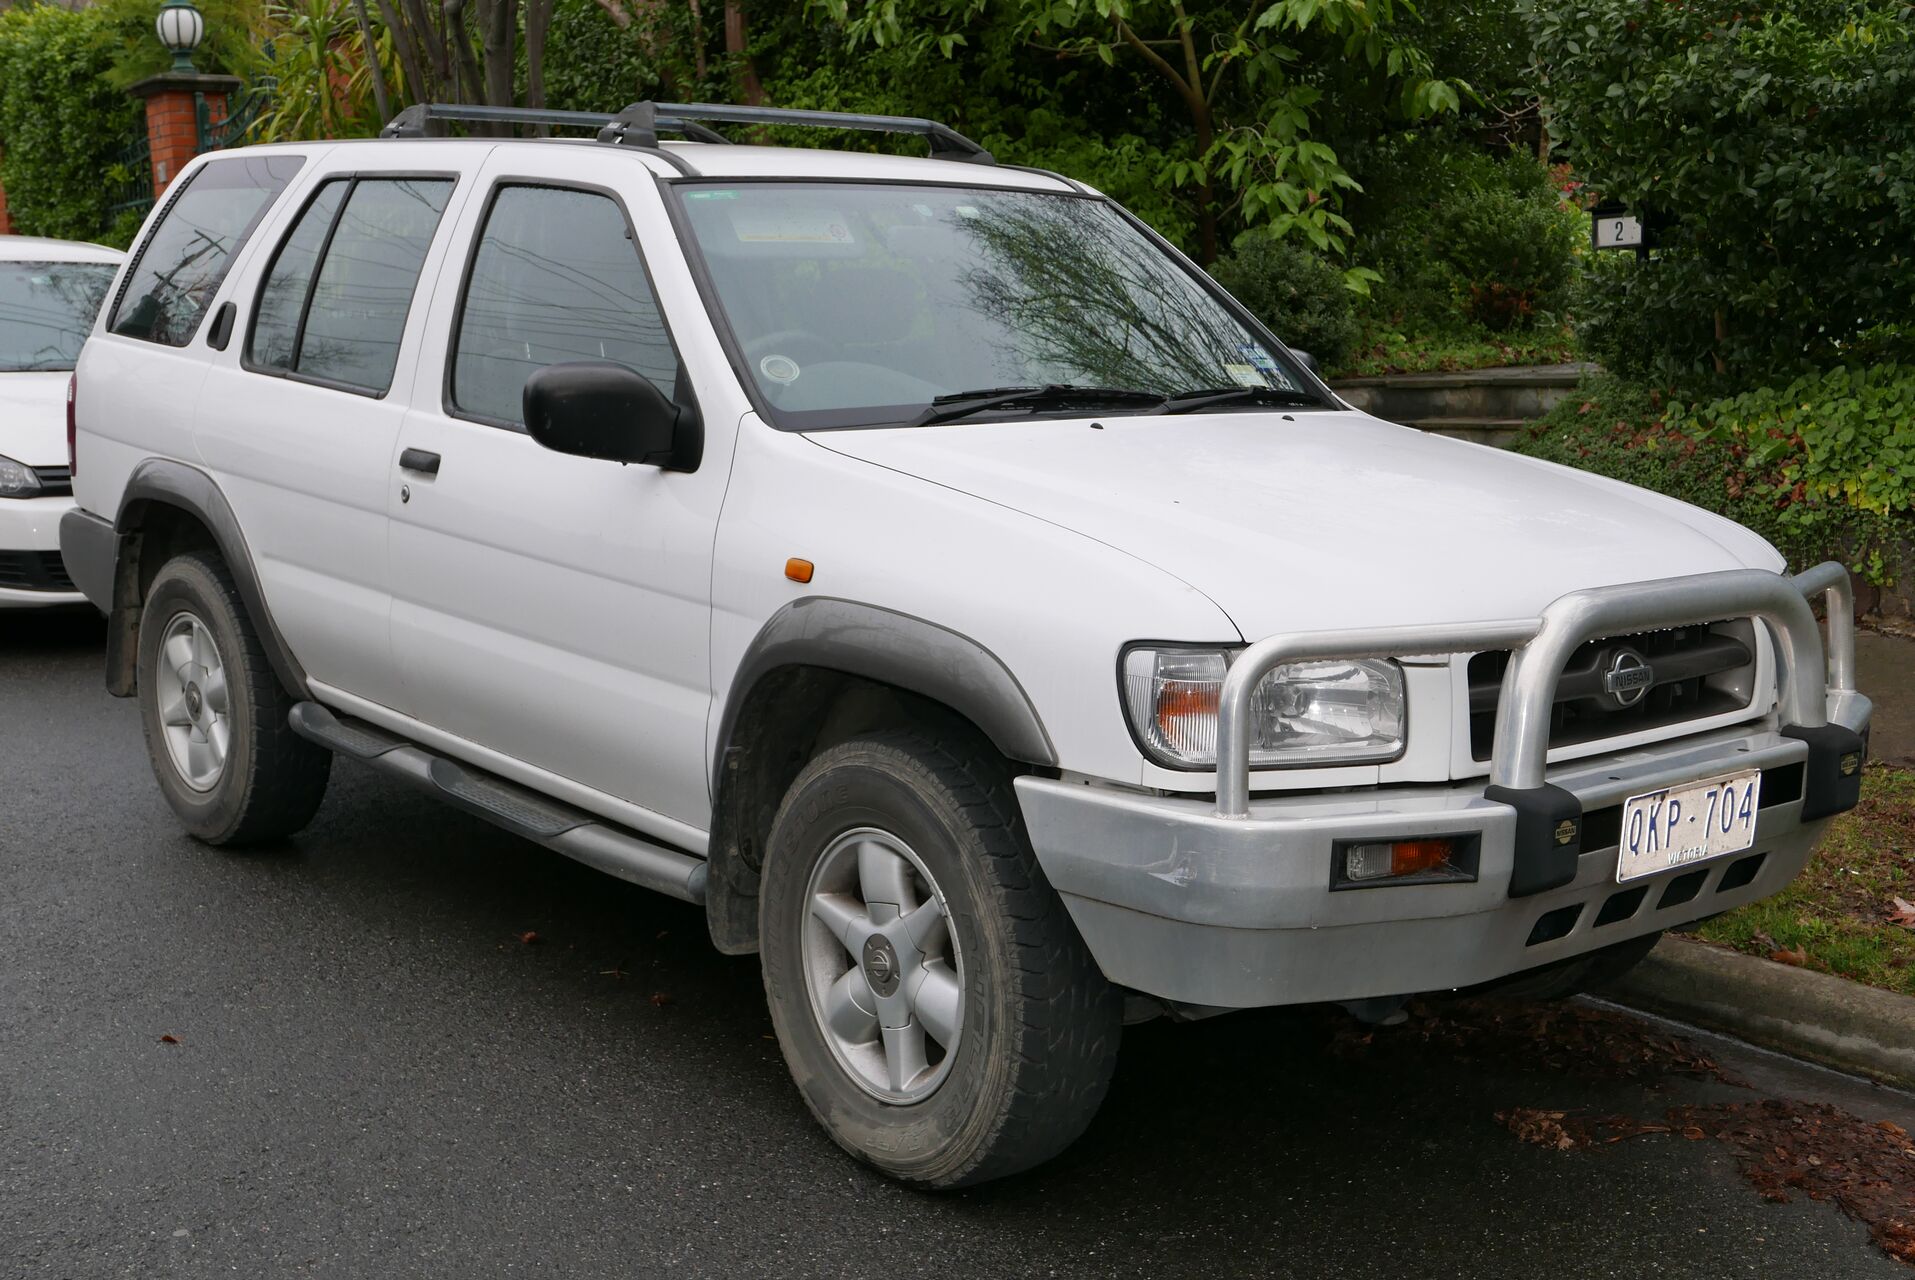 Nissan Pathfinder II 1995 2004 Specs and Technical Data, Fuel